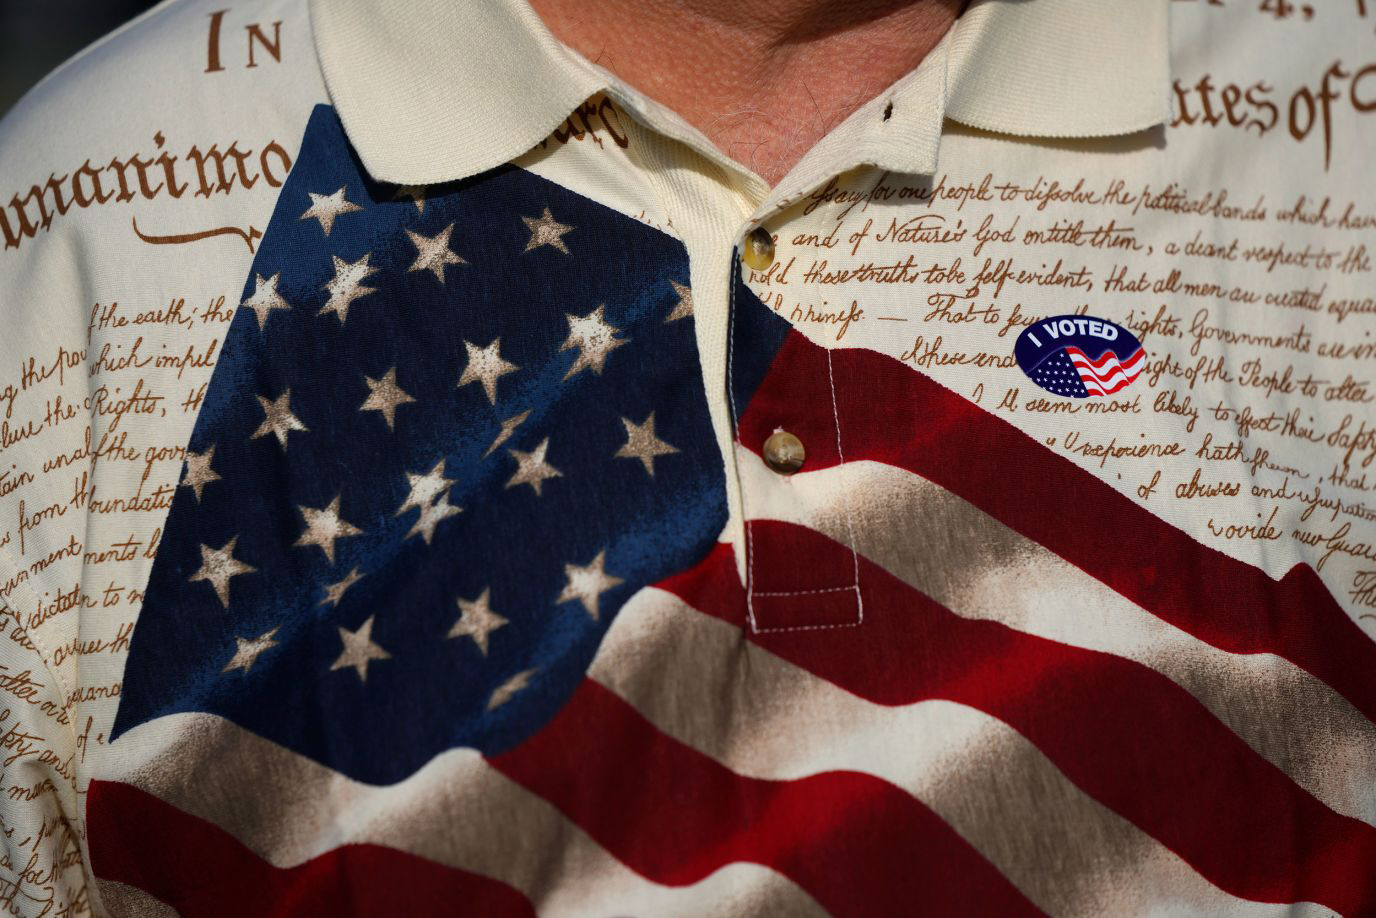 A man wears an "I Voted" sticker on his shirt after voting in Fort Myers, Florida, on Tuesday.